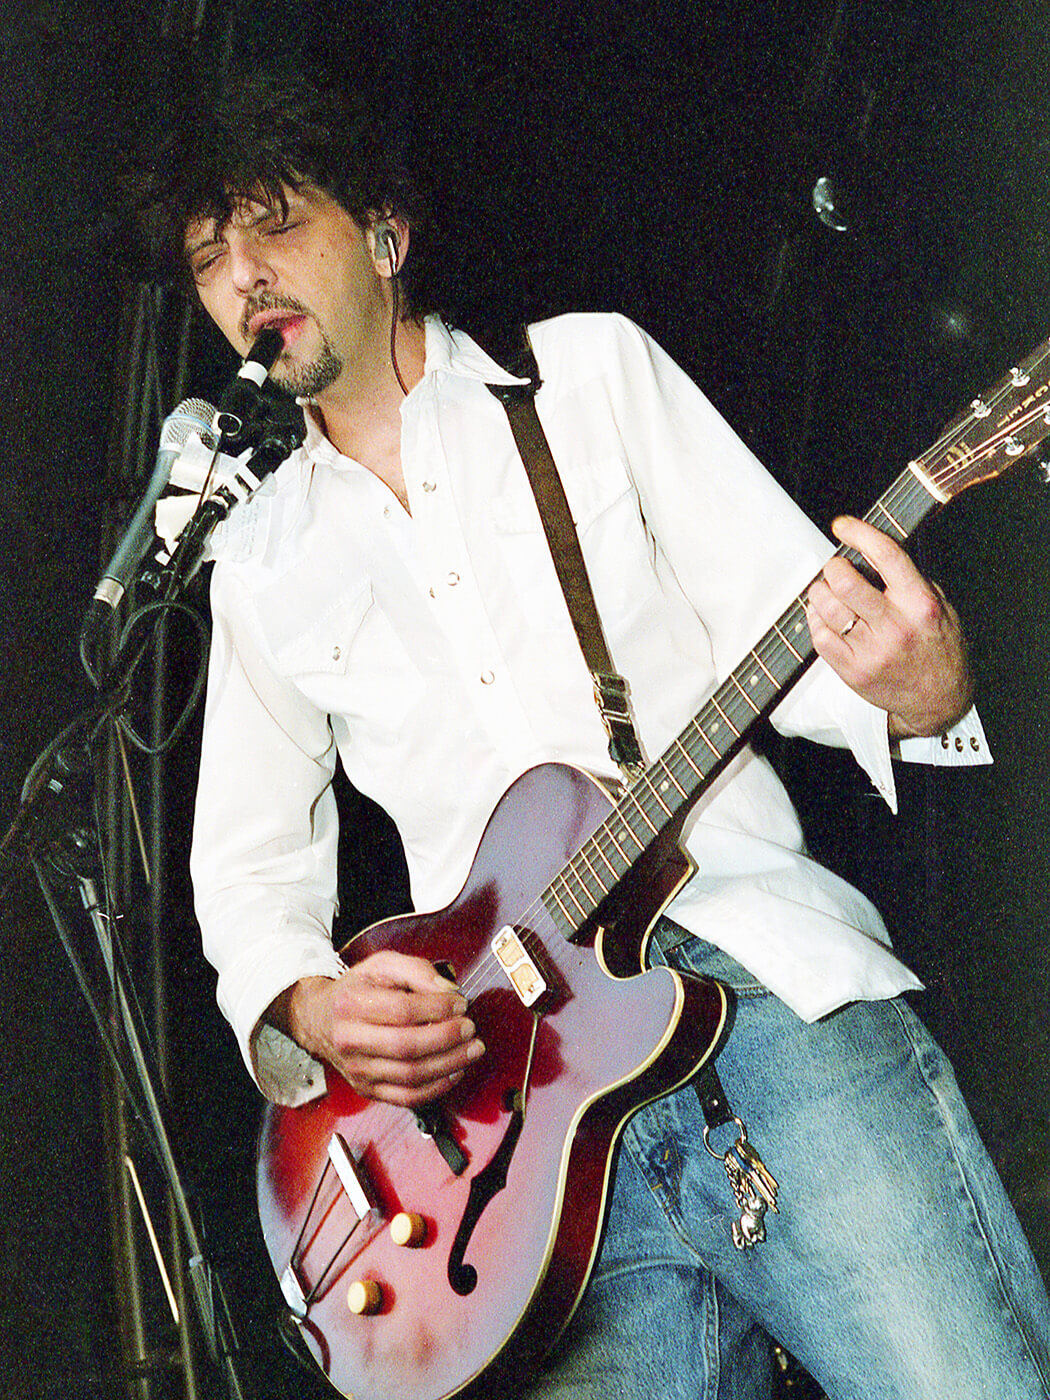 Mark Linkous of Sparklehorse performing in 2003, photo by Jim Dyson/Getty Images